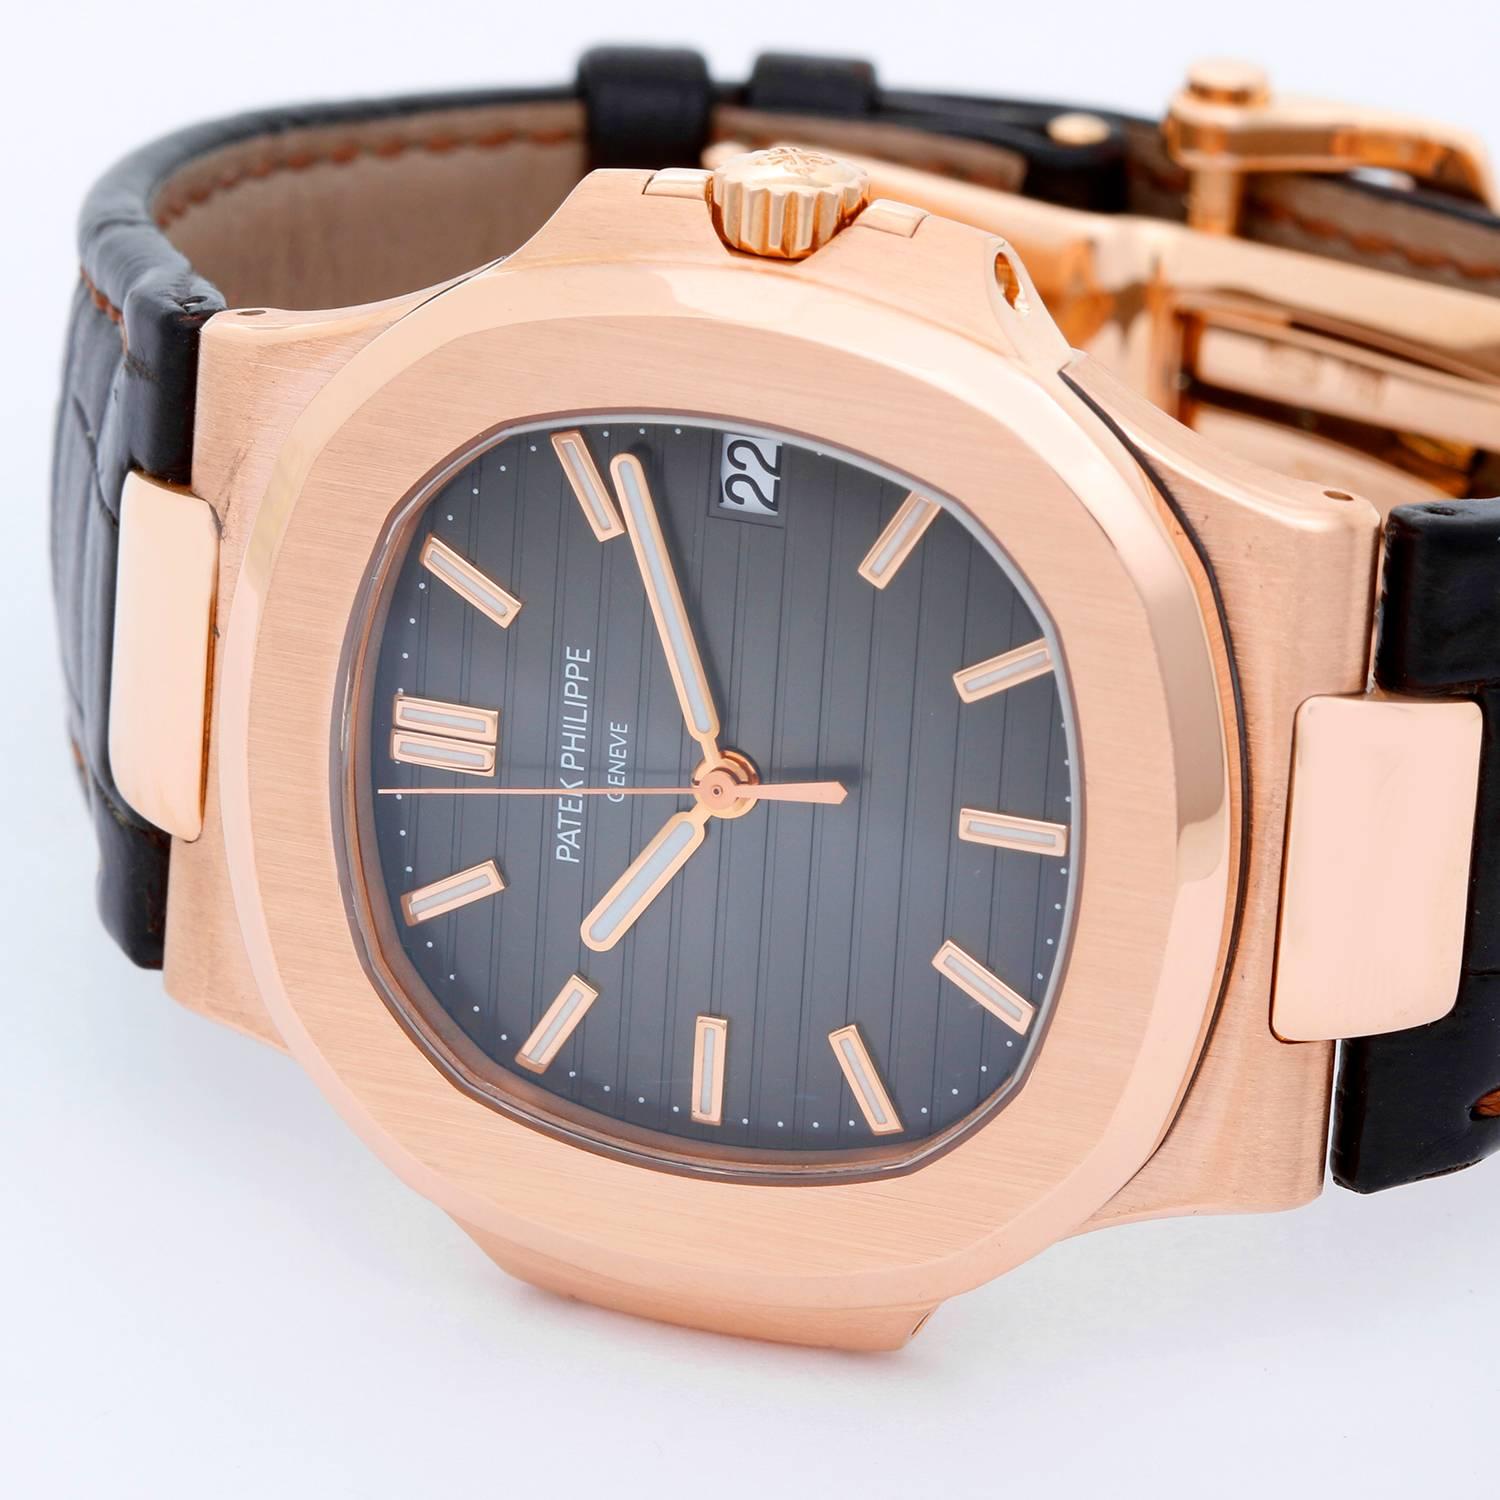 Patek Philippe & Co. Nautilus Men's 18k Rose Gold Watch 5711R-001 -  Automatic winding. 18k rose gold case (43mm) (43mm diameter). Brown dial. Leather strap band with 18k rose gold deployant clasp. Pre-owned  with box and papers.